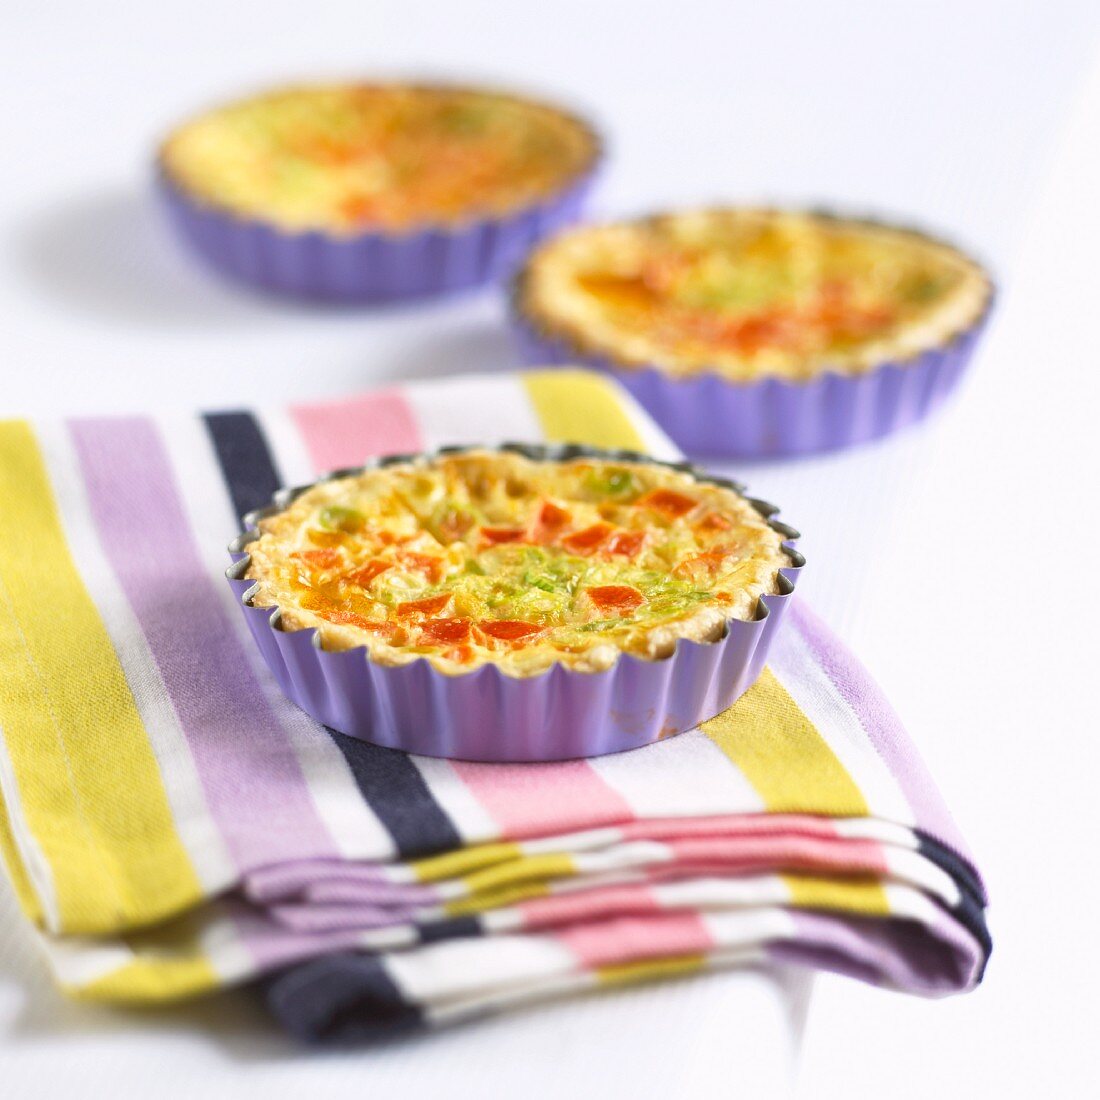 Three mini quiches with vegetables